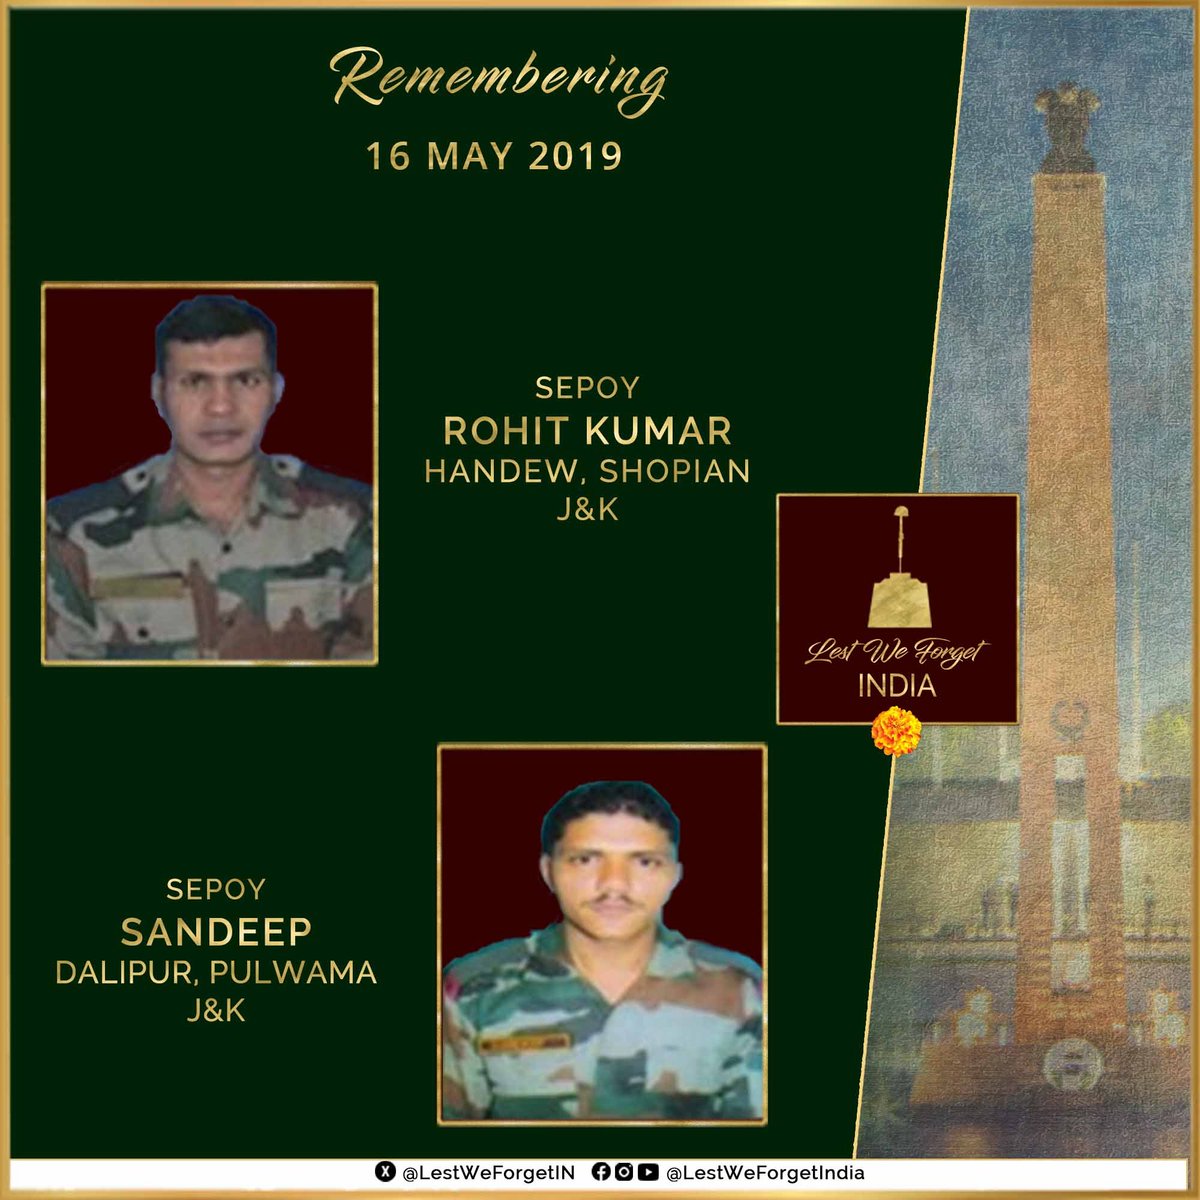 #LestWeForgetIndia🇮🇳 Sepoy Rohit Kumar Yadav & Sepoy Sandeep made the supreme sacrifice fighting terrorists in #Shopian & #Pulwama, J&K respectively, #OnThisDay 16 May in 2019 Remember the #IndianBraves - their service & sacrifice for the Nation always🏵️